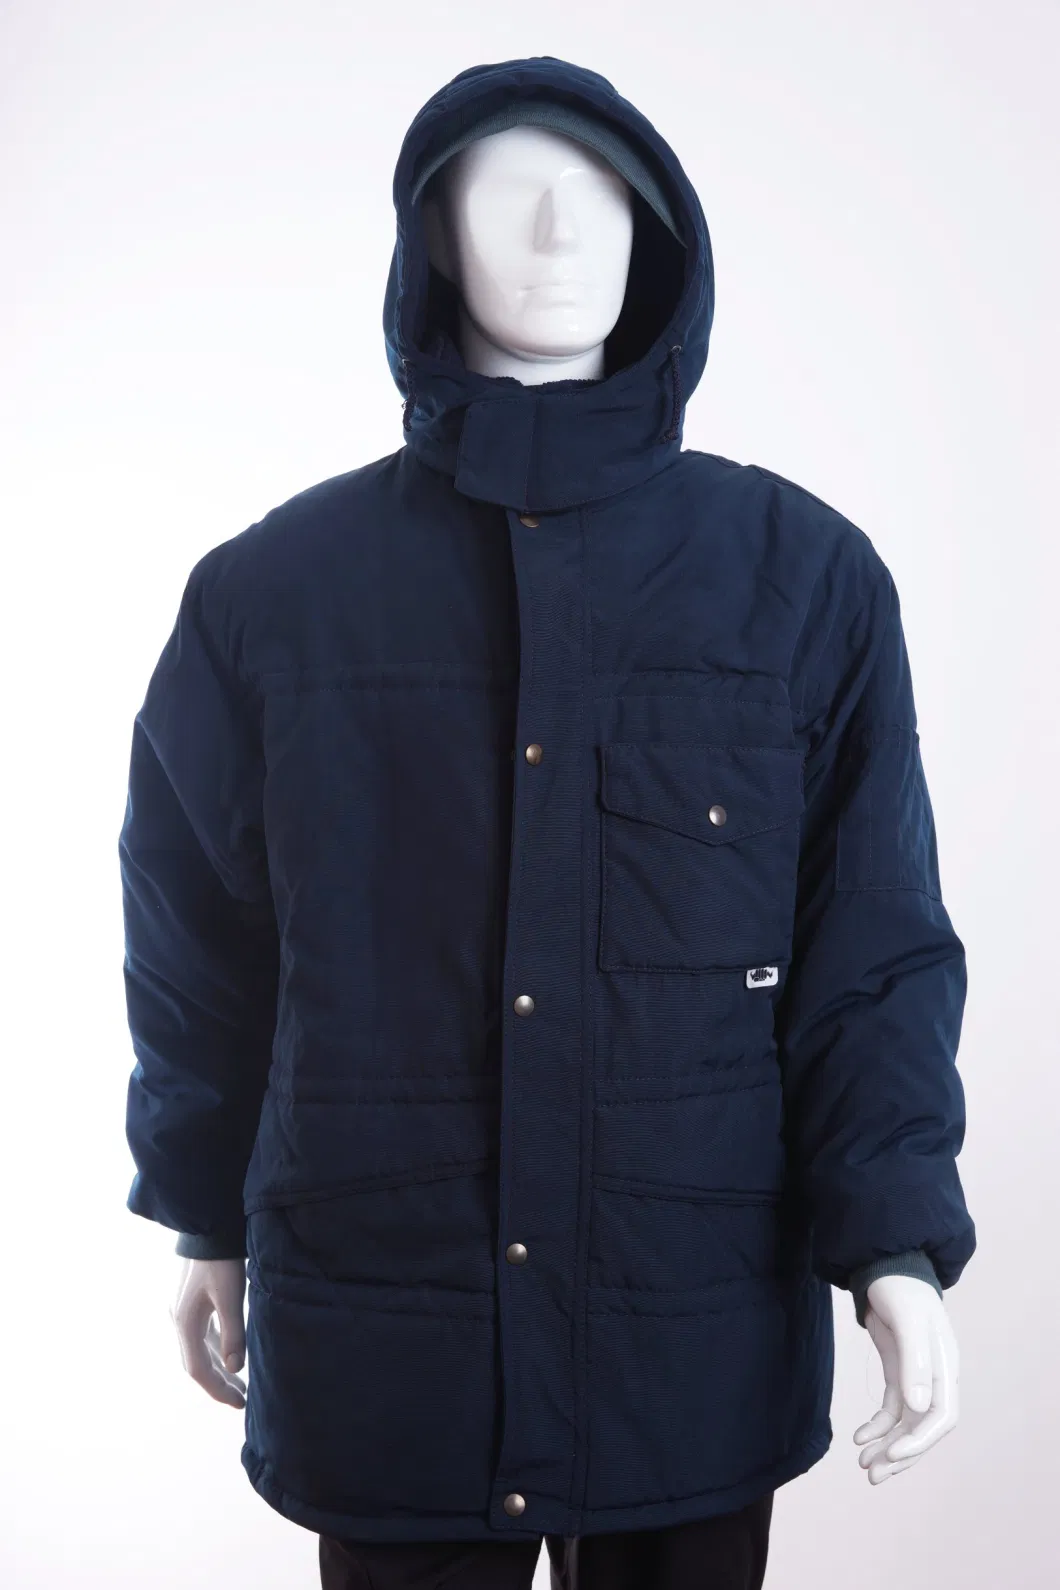 Security Police Uniform Causal Windproof Winter Jacket for Cold Protection